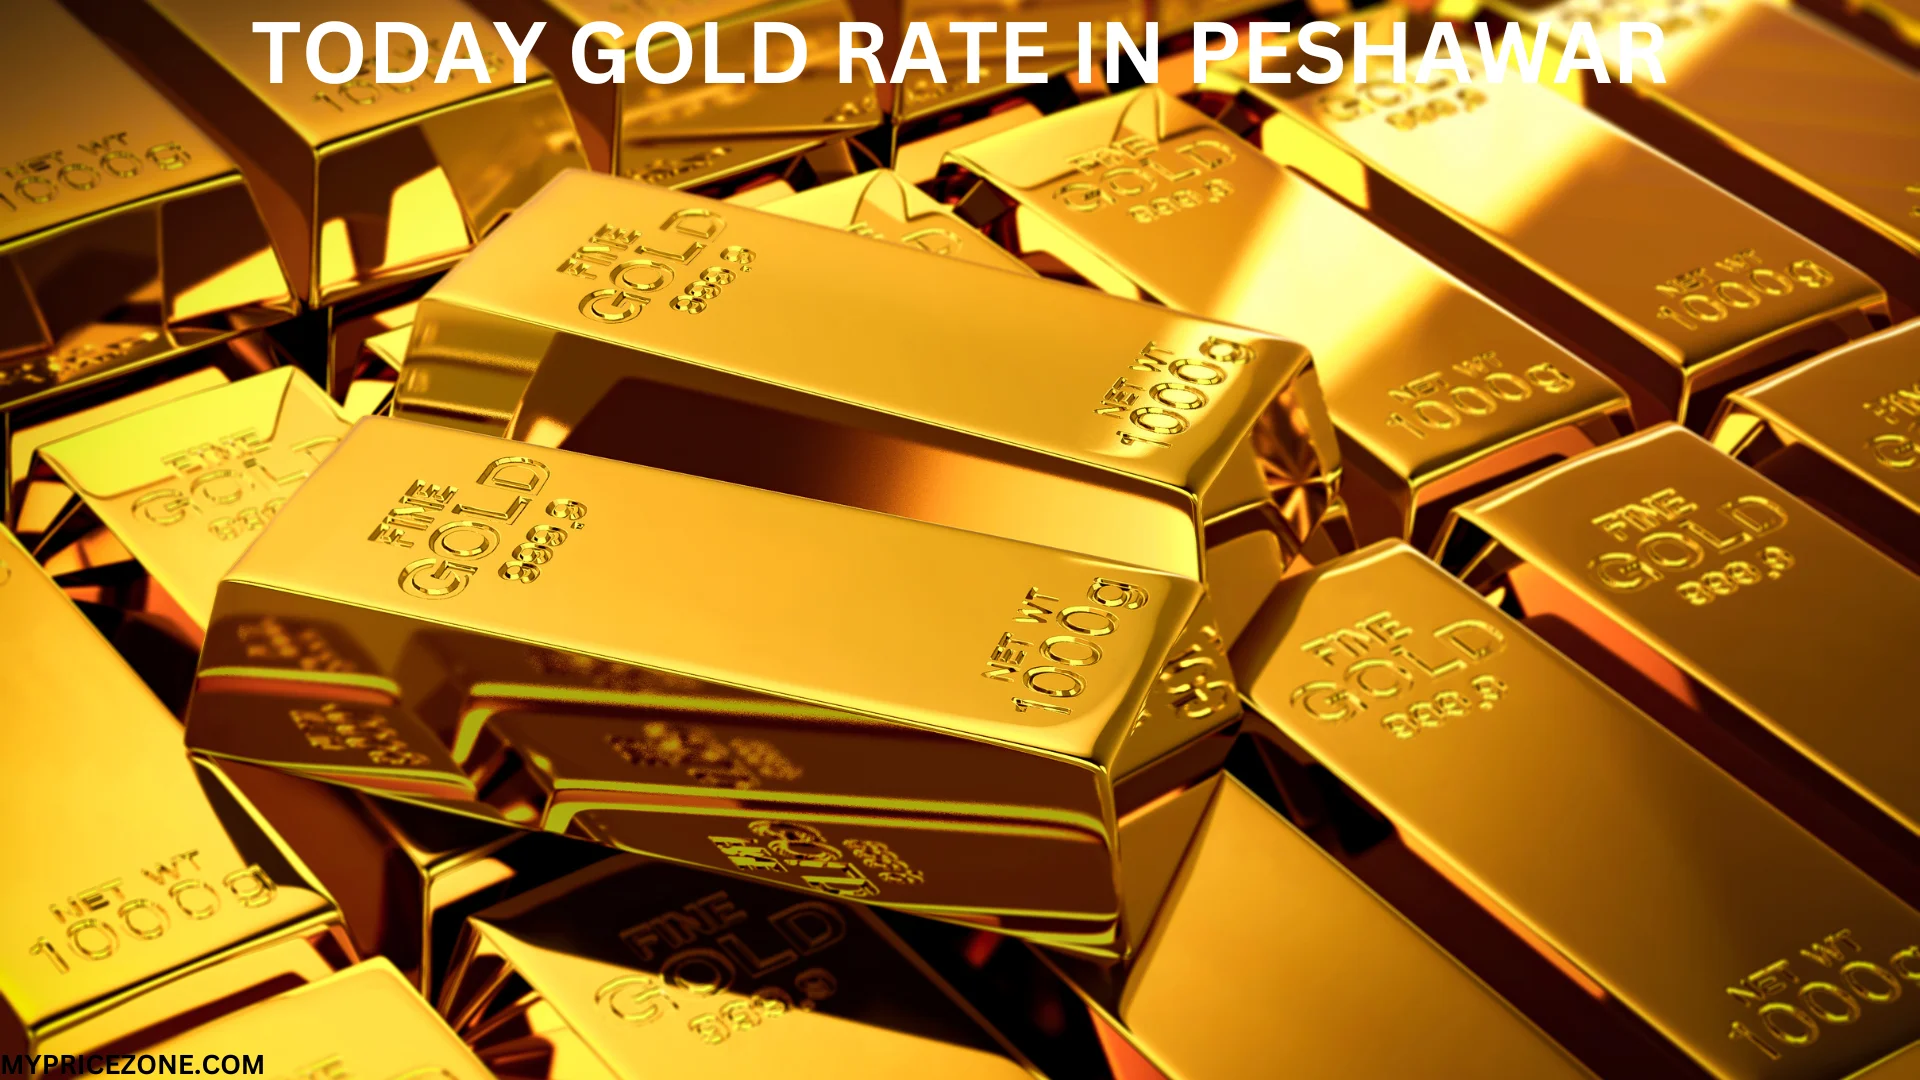 gold bars with today gold rate in Peshawar